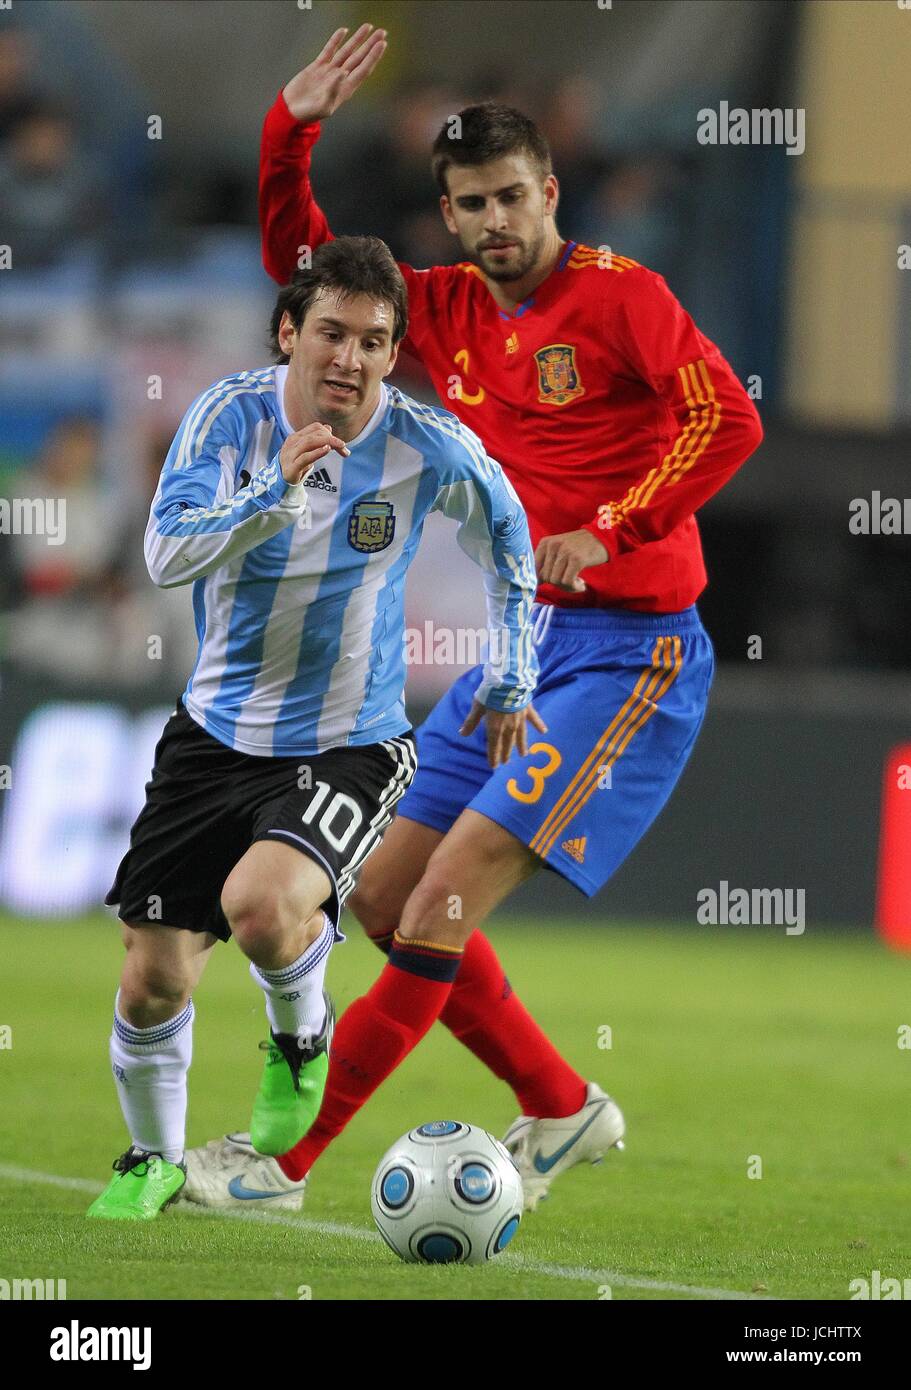 LIONEL MESSI & GERARD PIQUE SPAIN V ARGENTINA SPAIN V ARGENTINA ESTADIO  VICENTE CADERON, MADRID, SPAIN 14 November 2009 GAA3703 WARNING! This  Photograph May Only Be Used For Newspaper And/Or Magazine Editorial